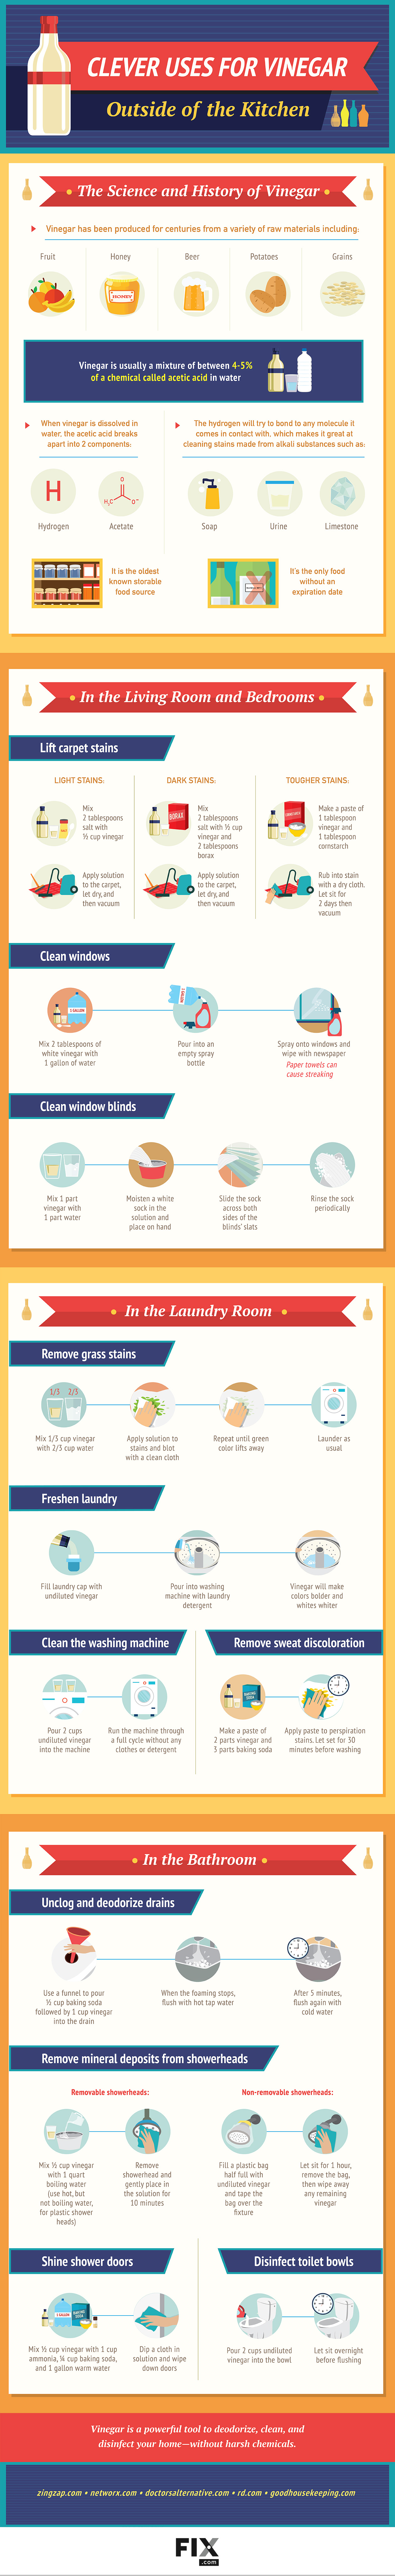 9 Ways to Use Vinegar for Cleaning